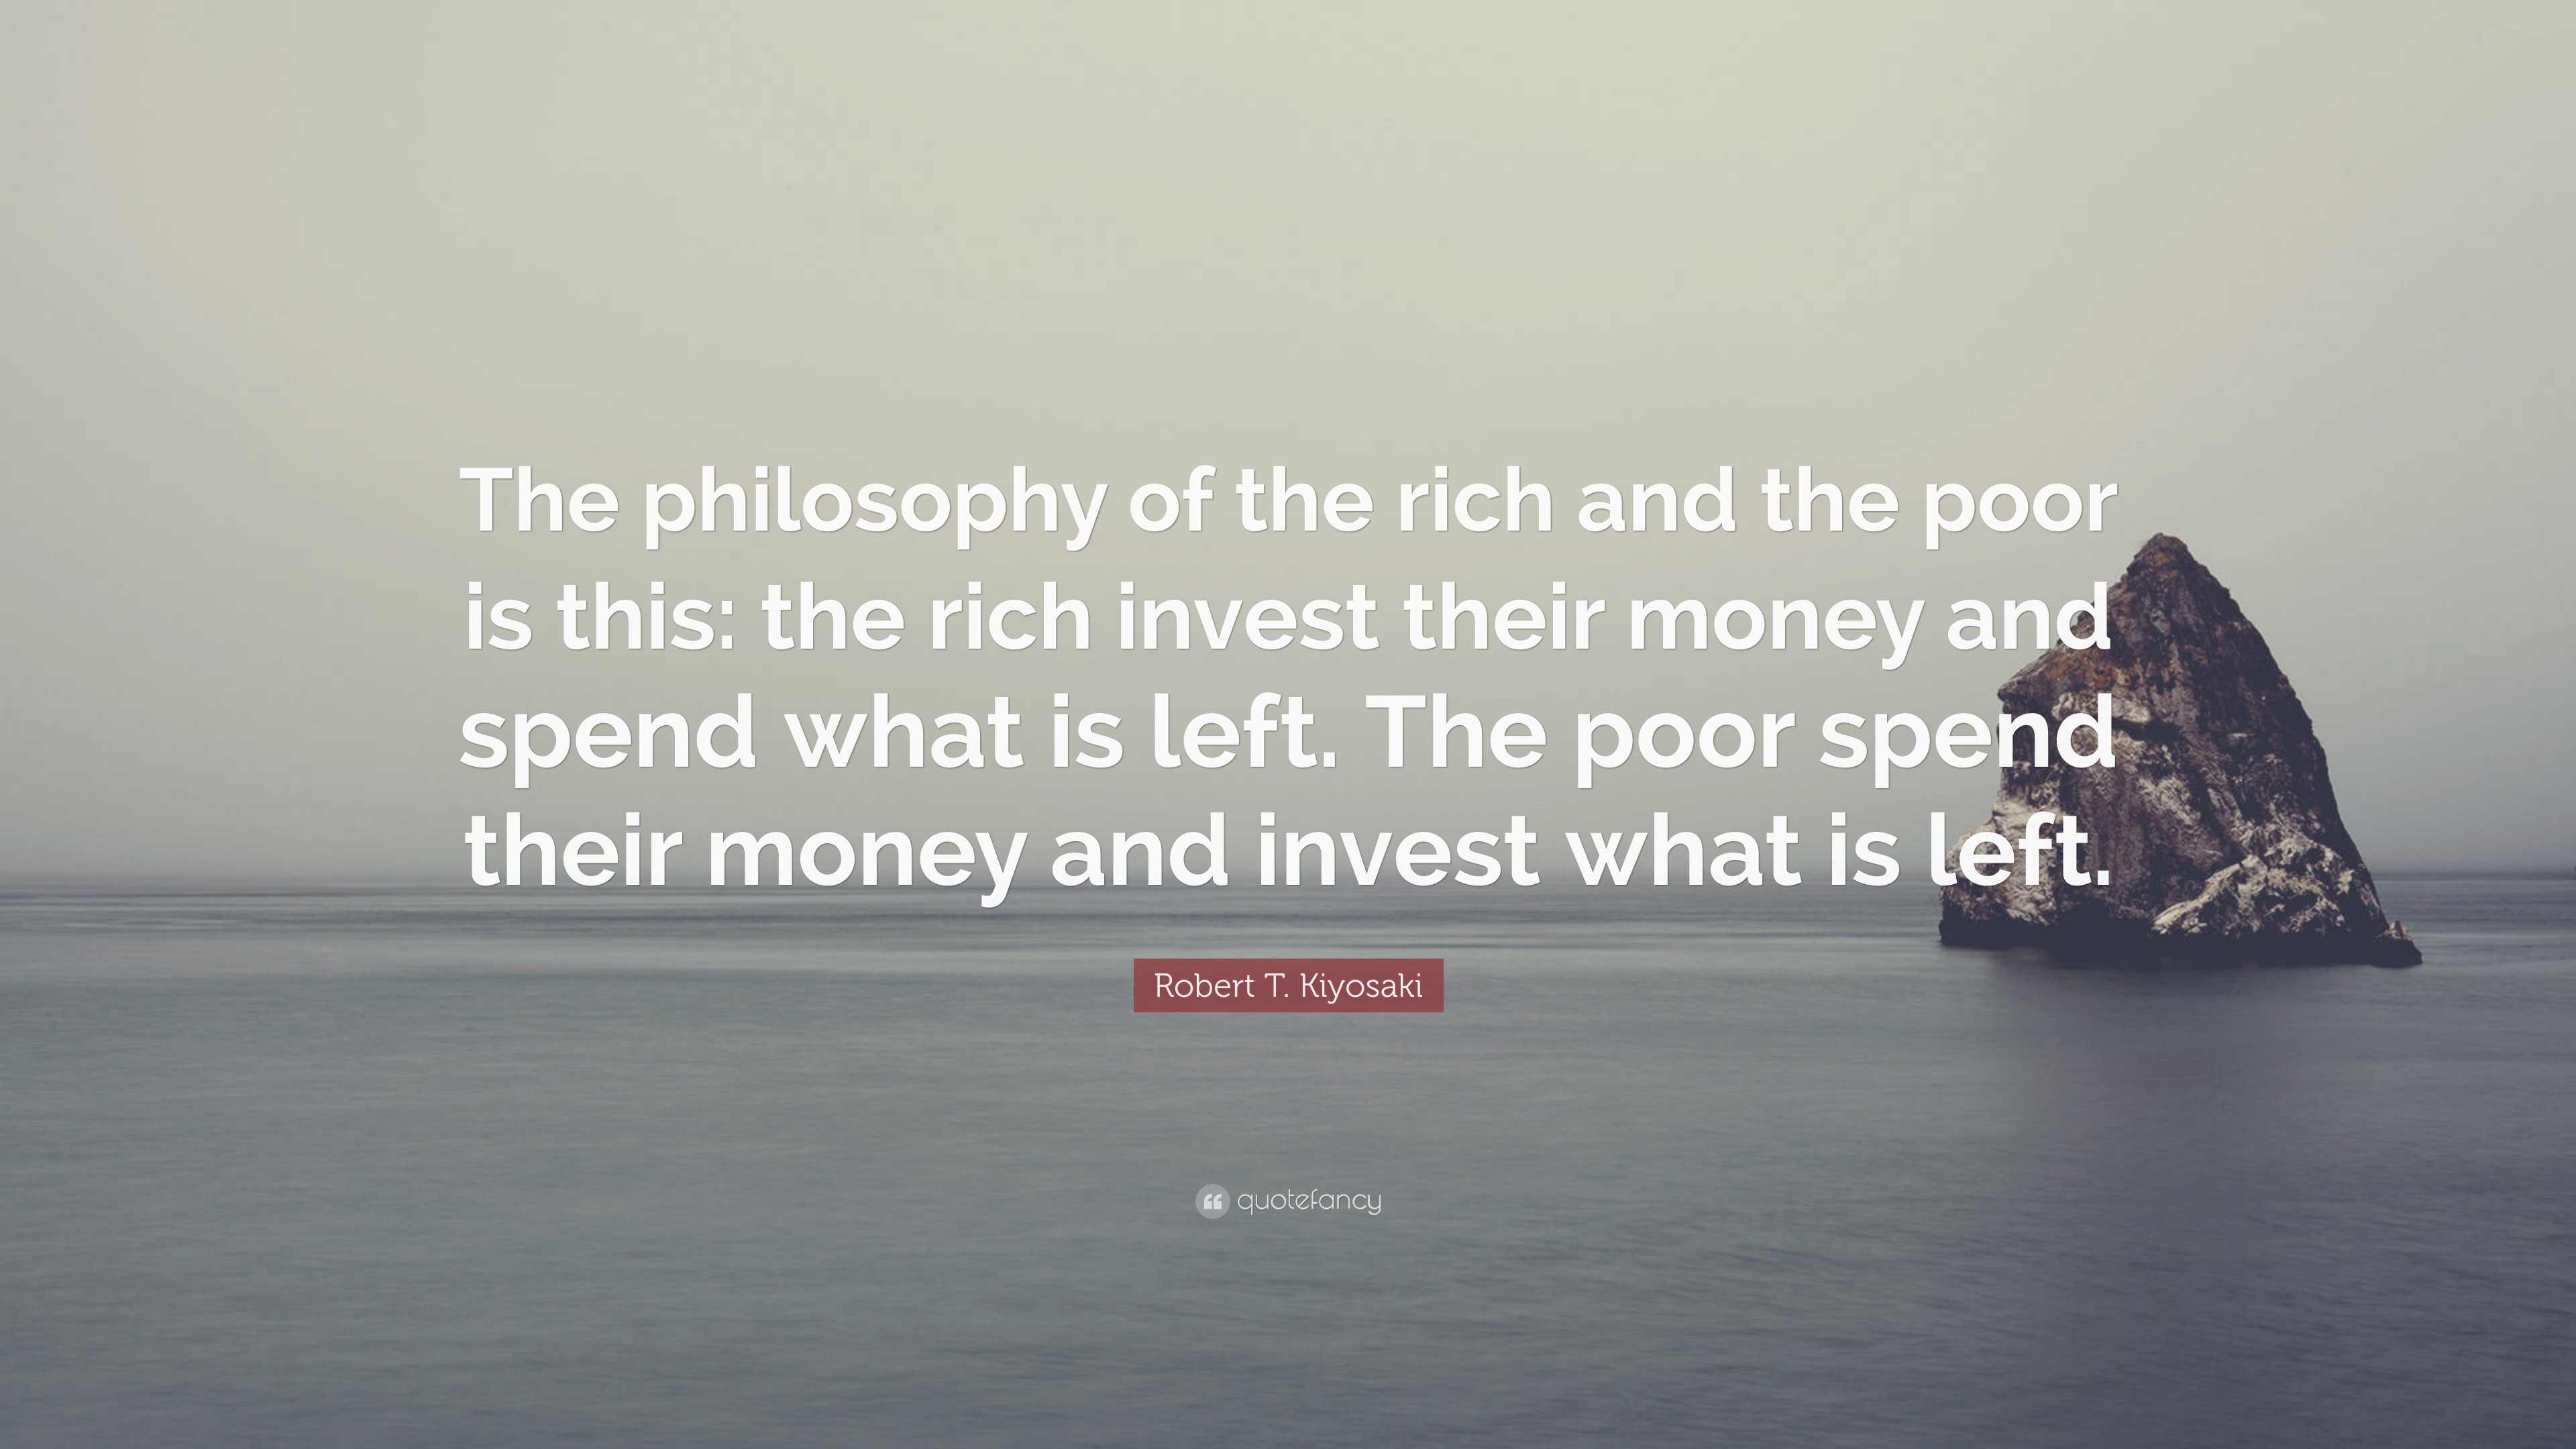 Robert T. Kiyosaki Quote: "The philosophy of the rich and ...